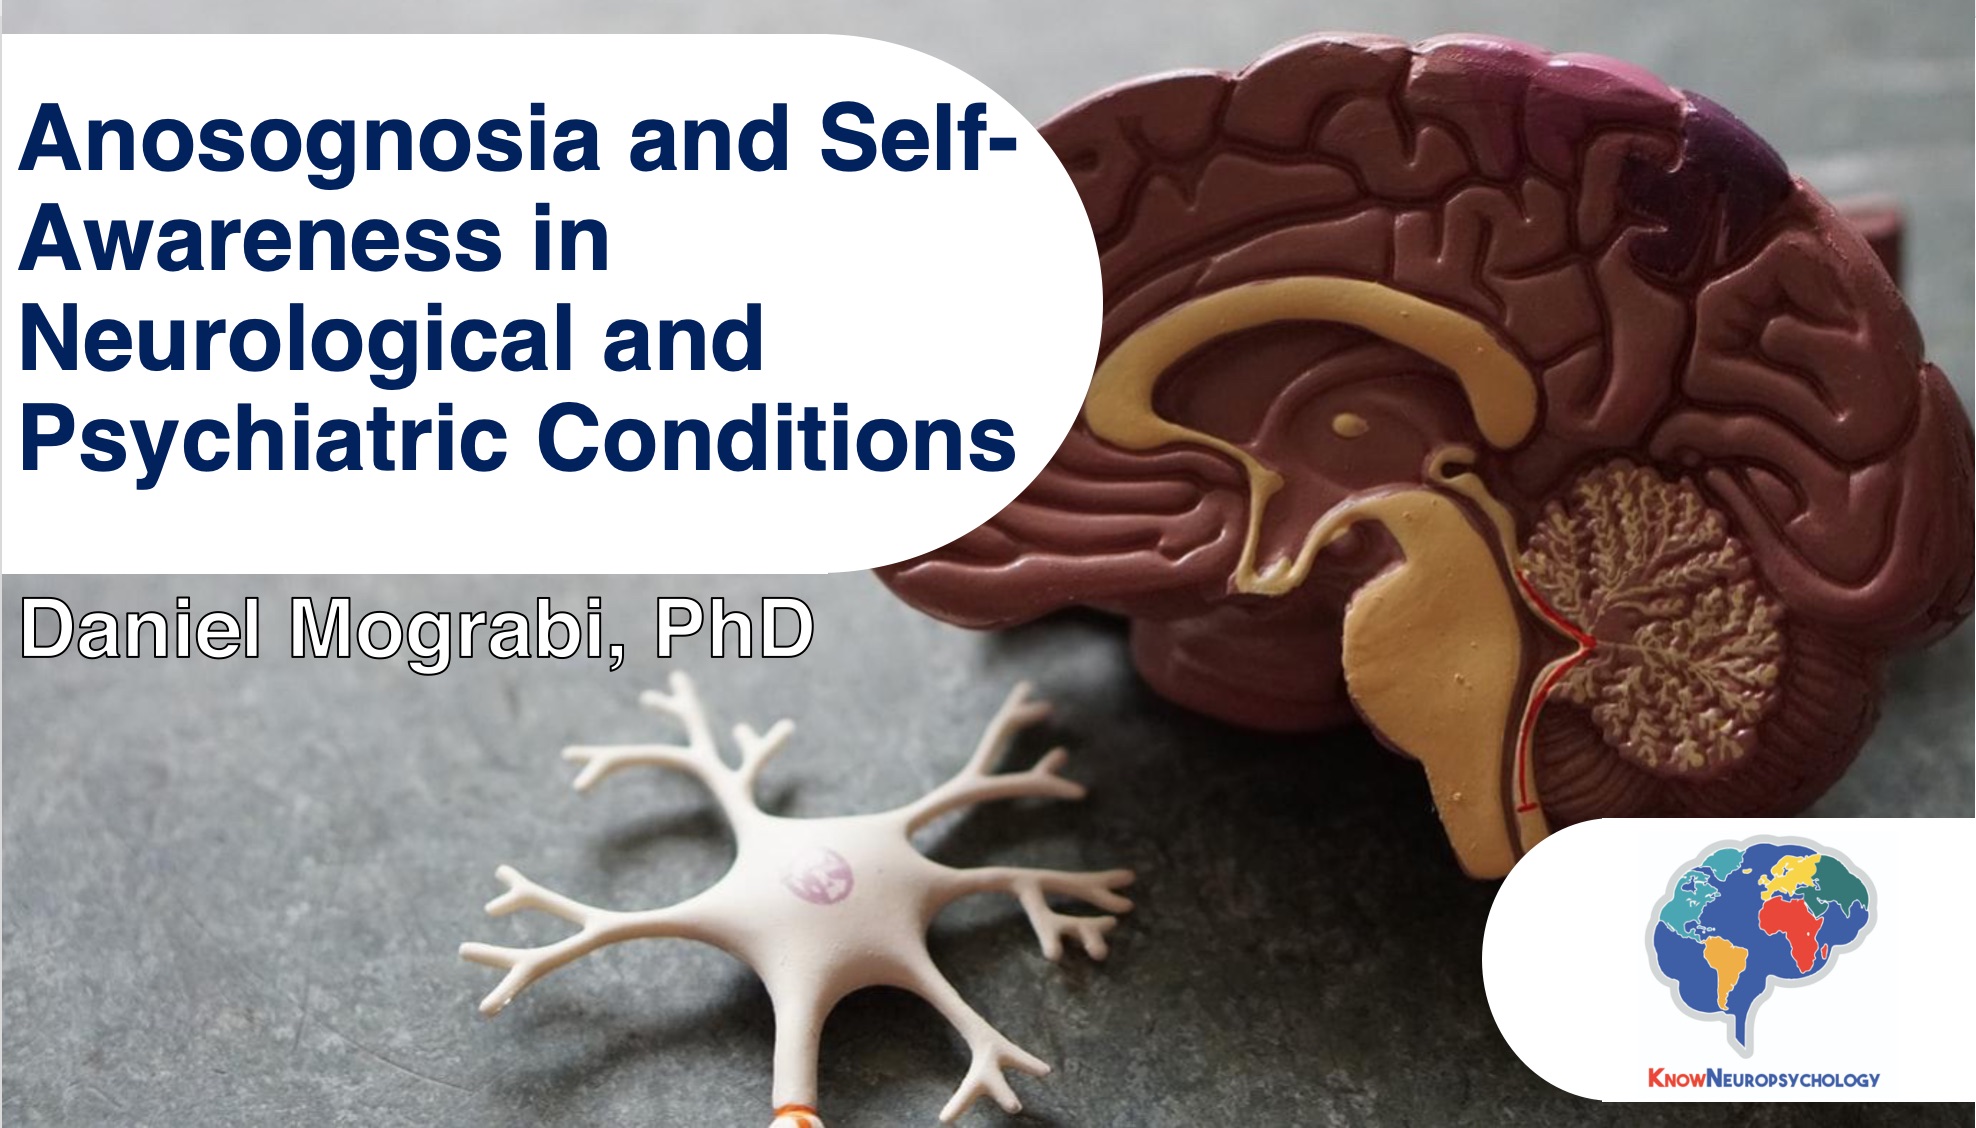 Anosognosia and Self-Awareness in Neurological and Psychiatric Conditions by Dr. Daniel Mograbi